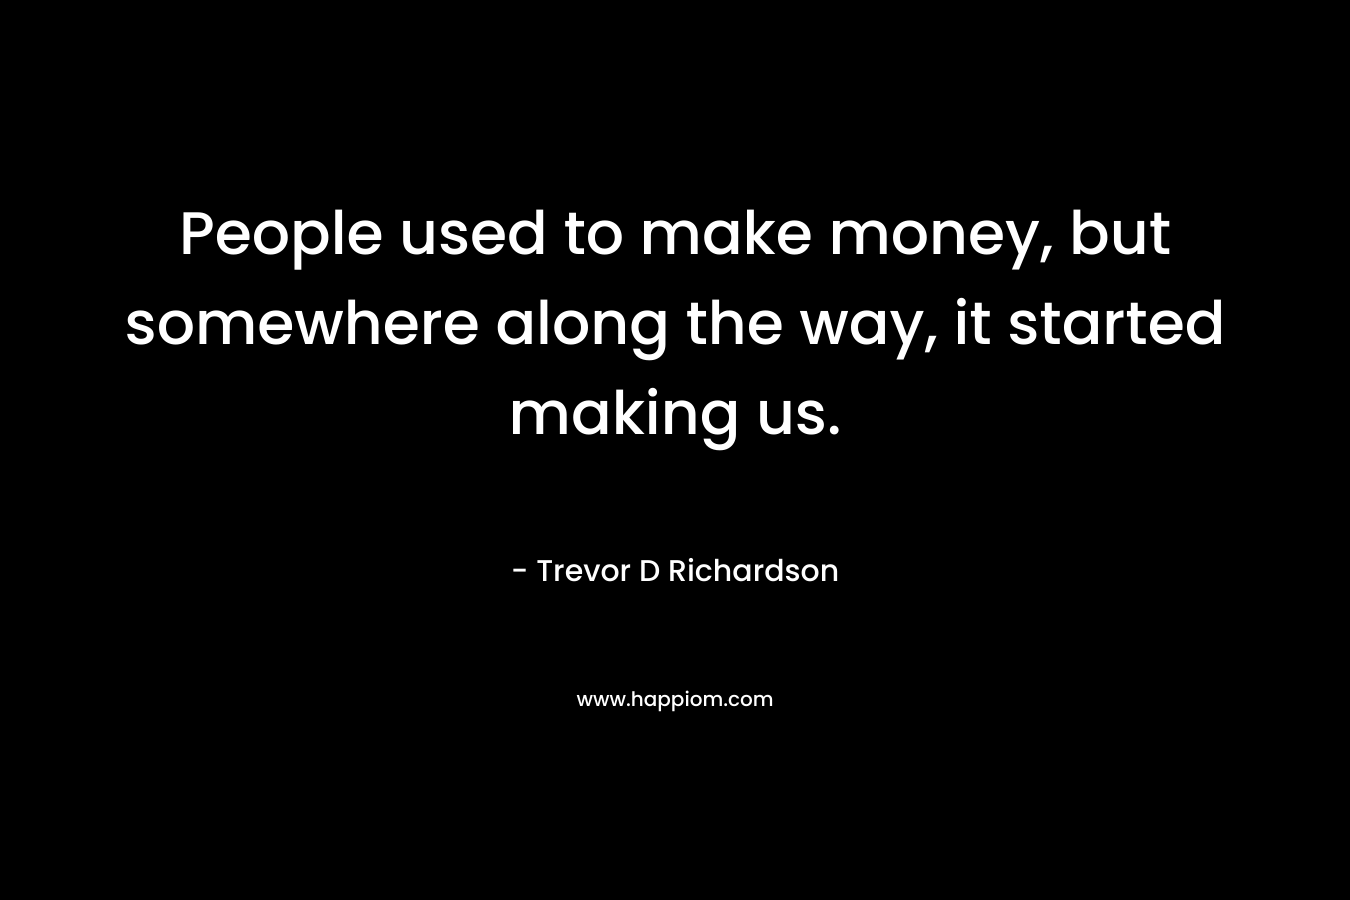 People used to make money, but somewhere along the way, it started making us.